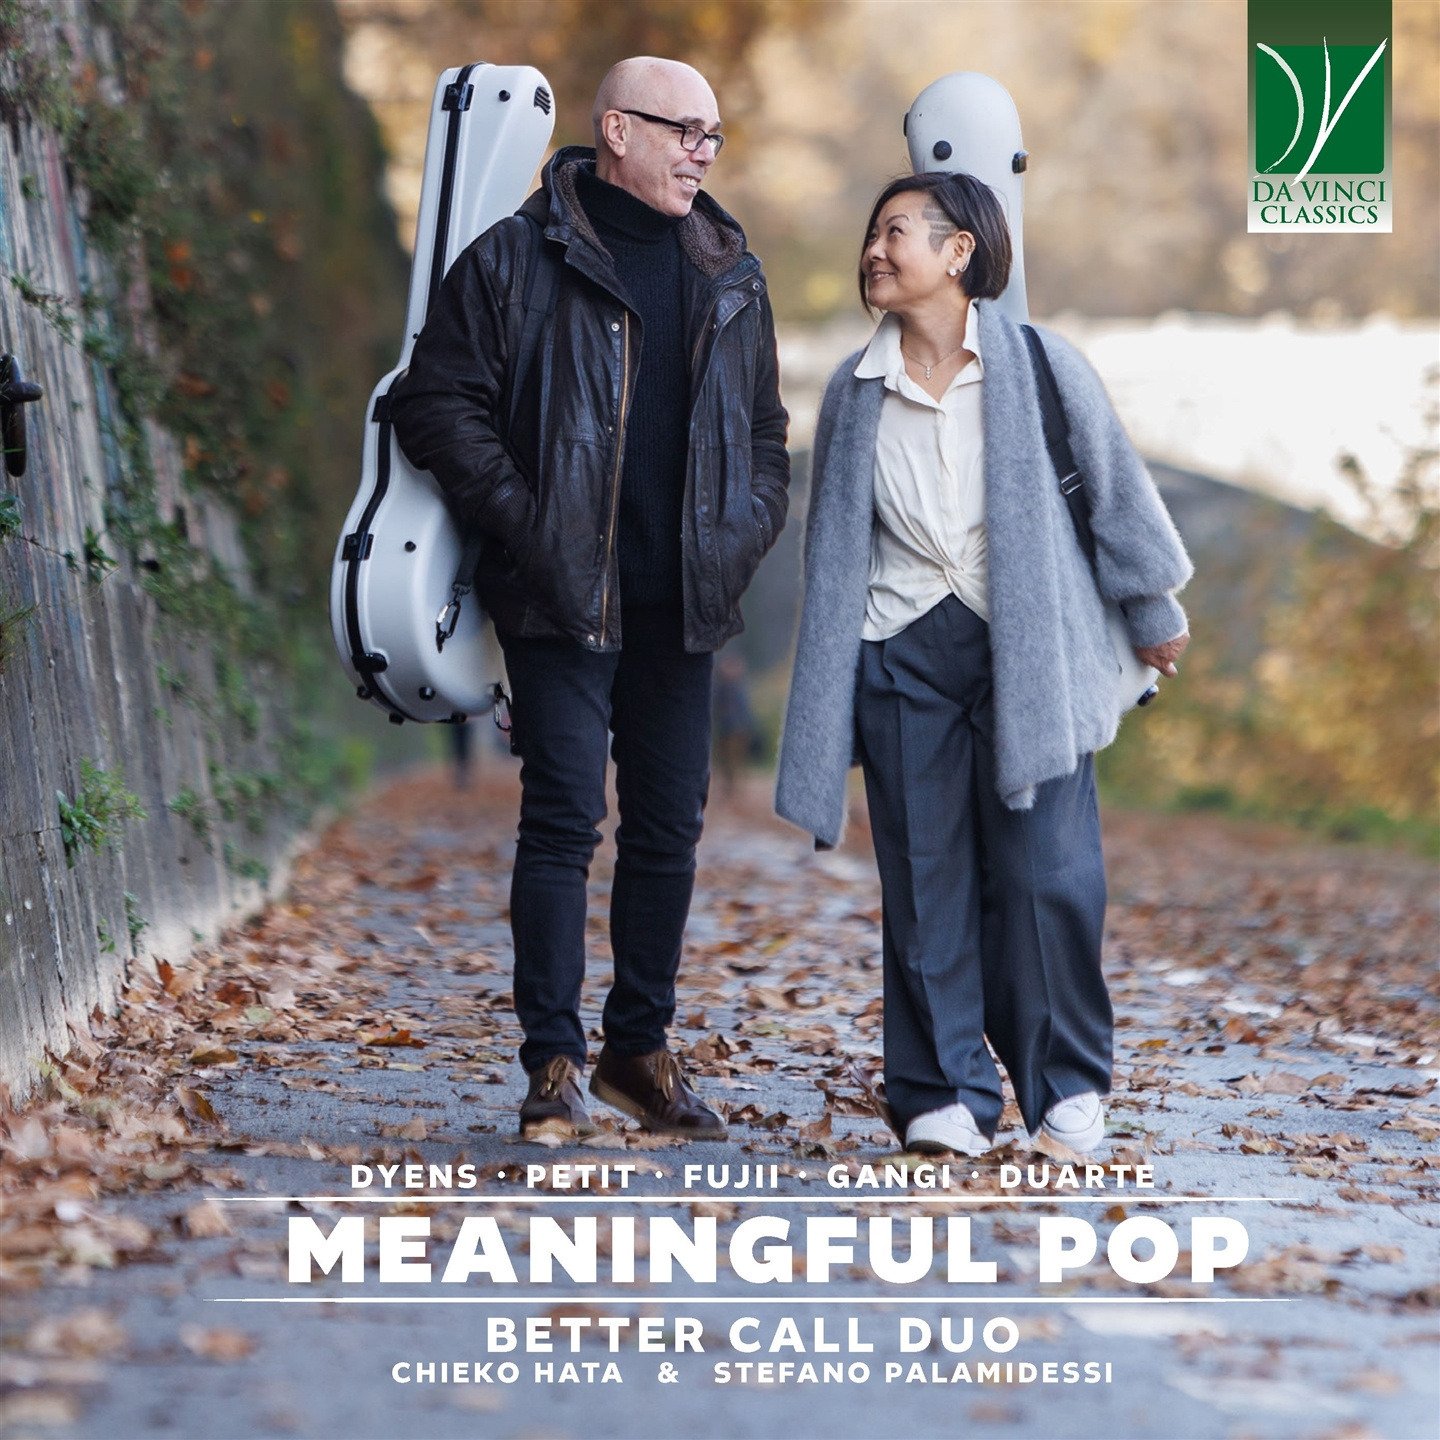 CD Shop - BETTER CALL DUO MEANINGFUL POP